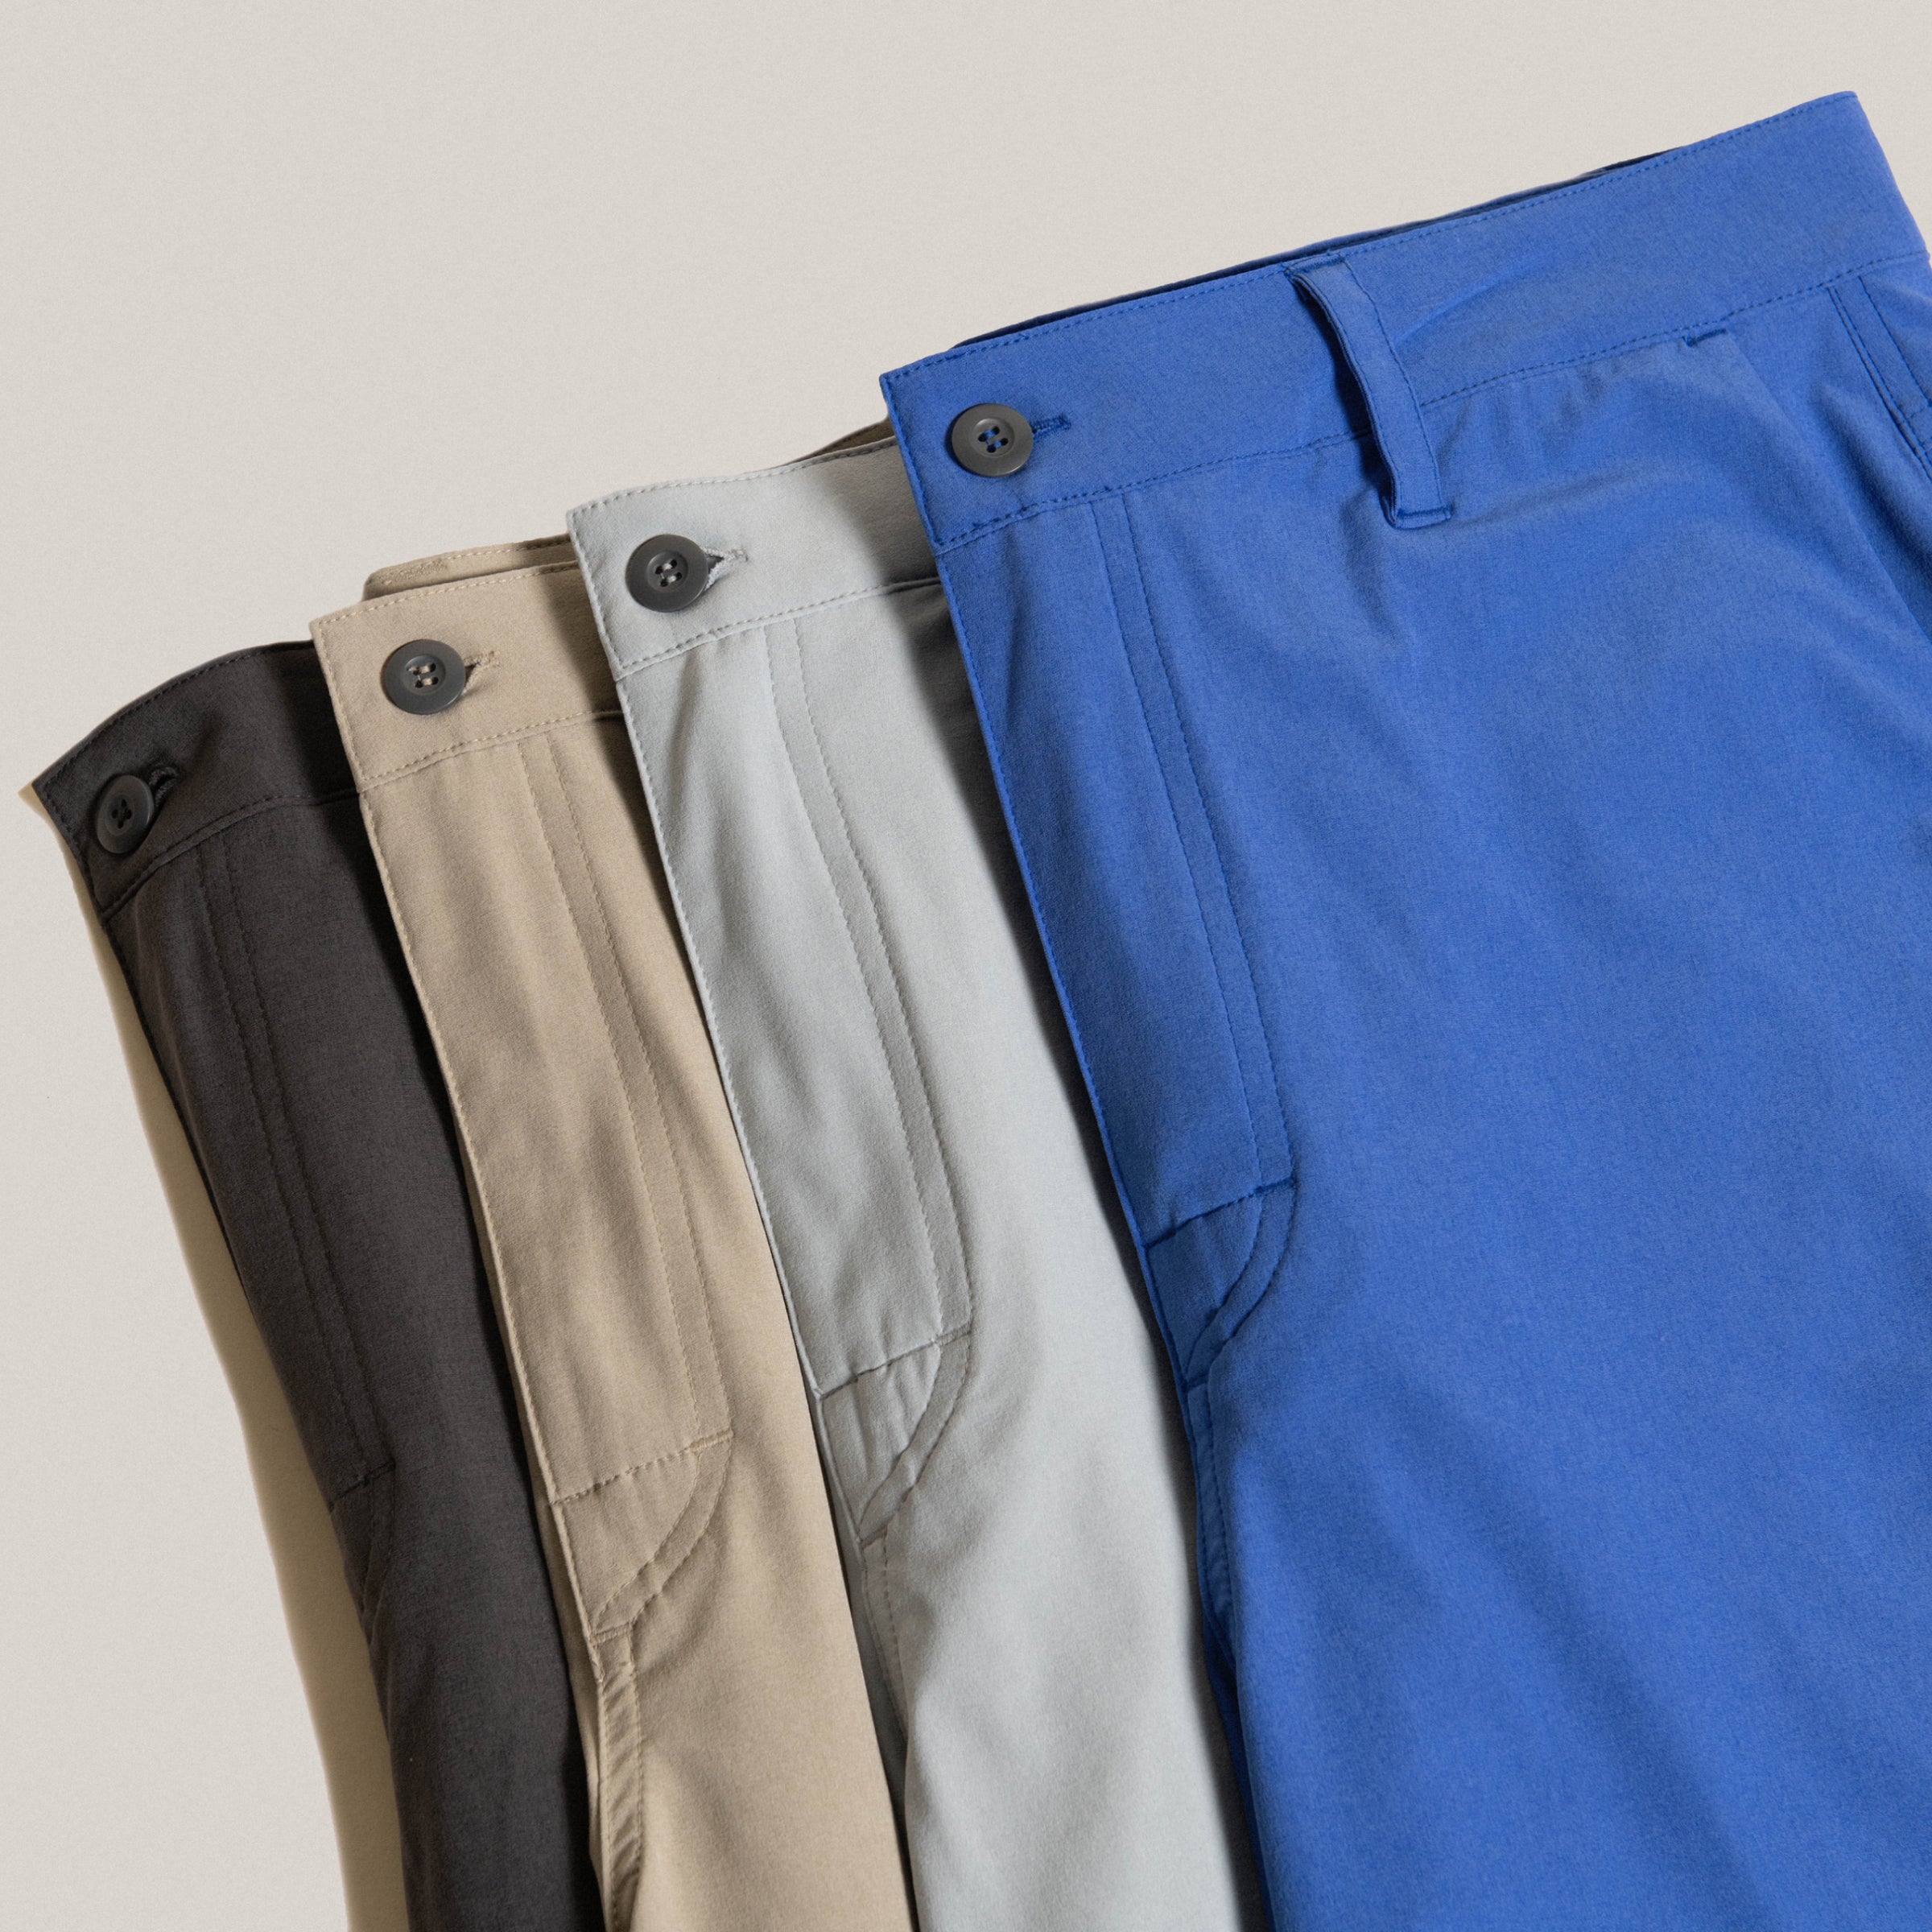 A variety of solid color SAXX joggers laid out over a neutral background.